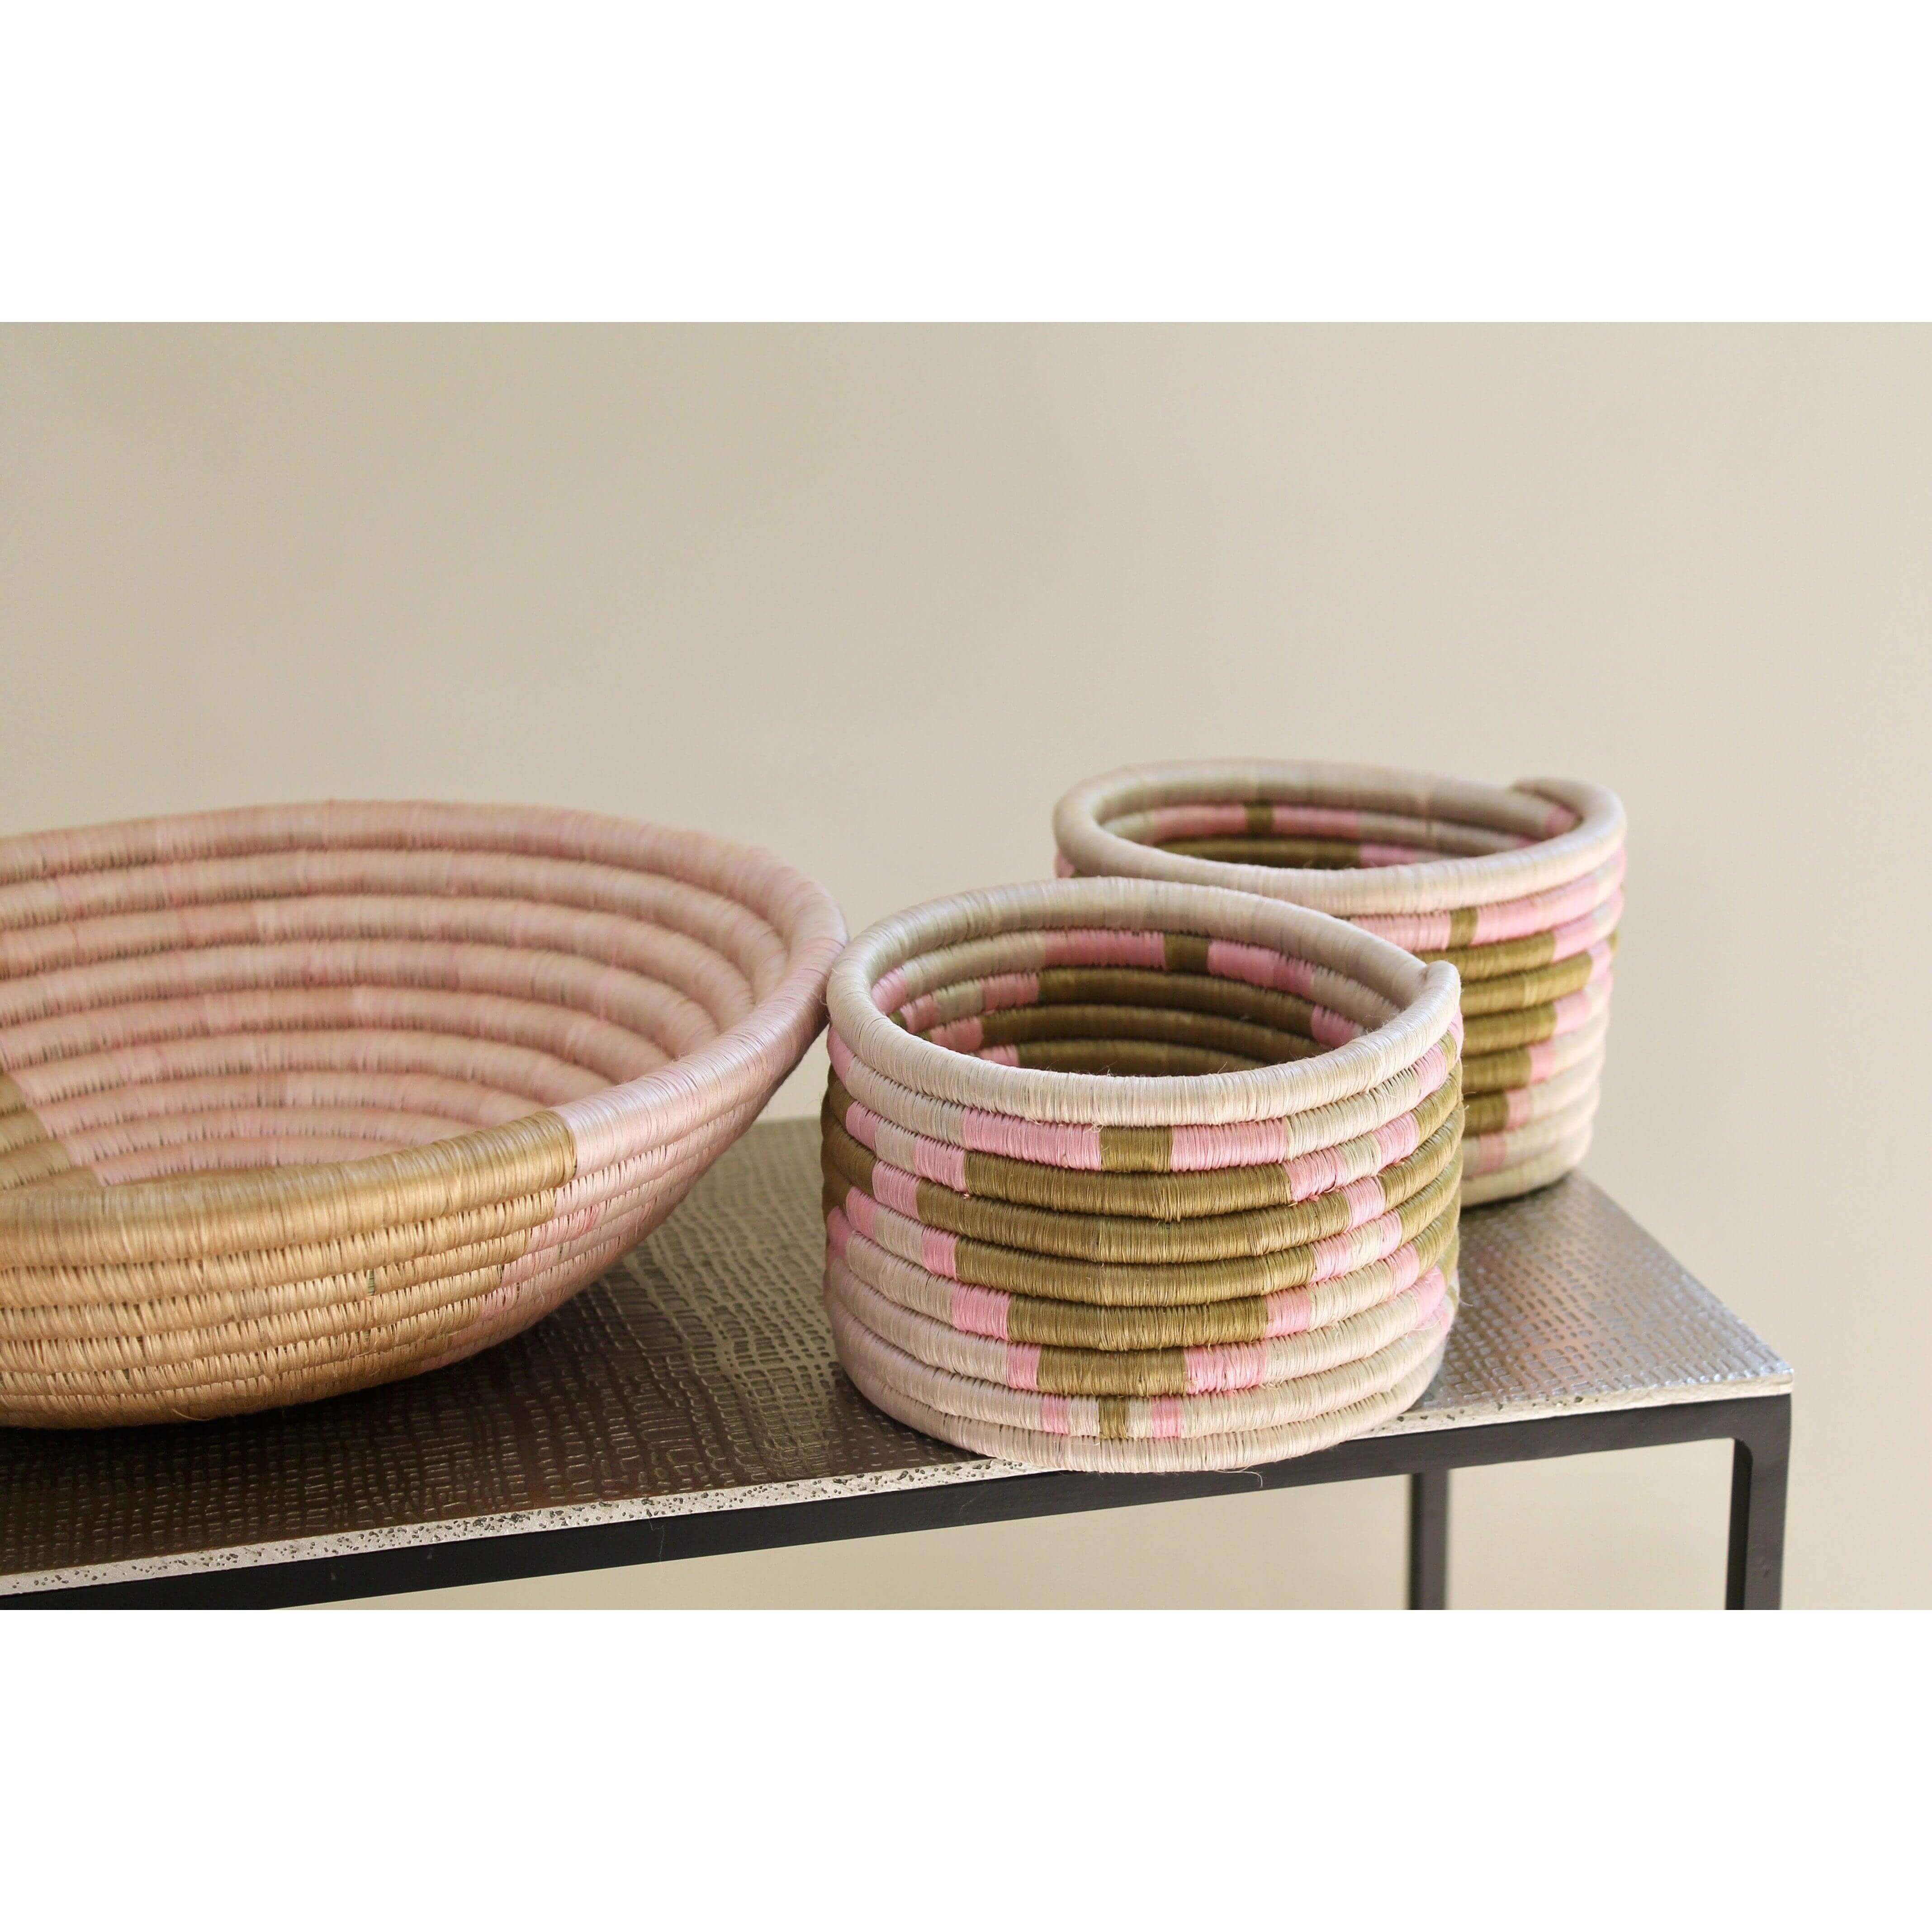 Woven fair trade seagrass trinket dishes